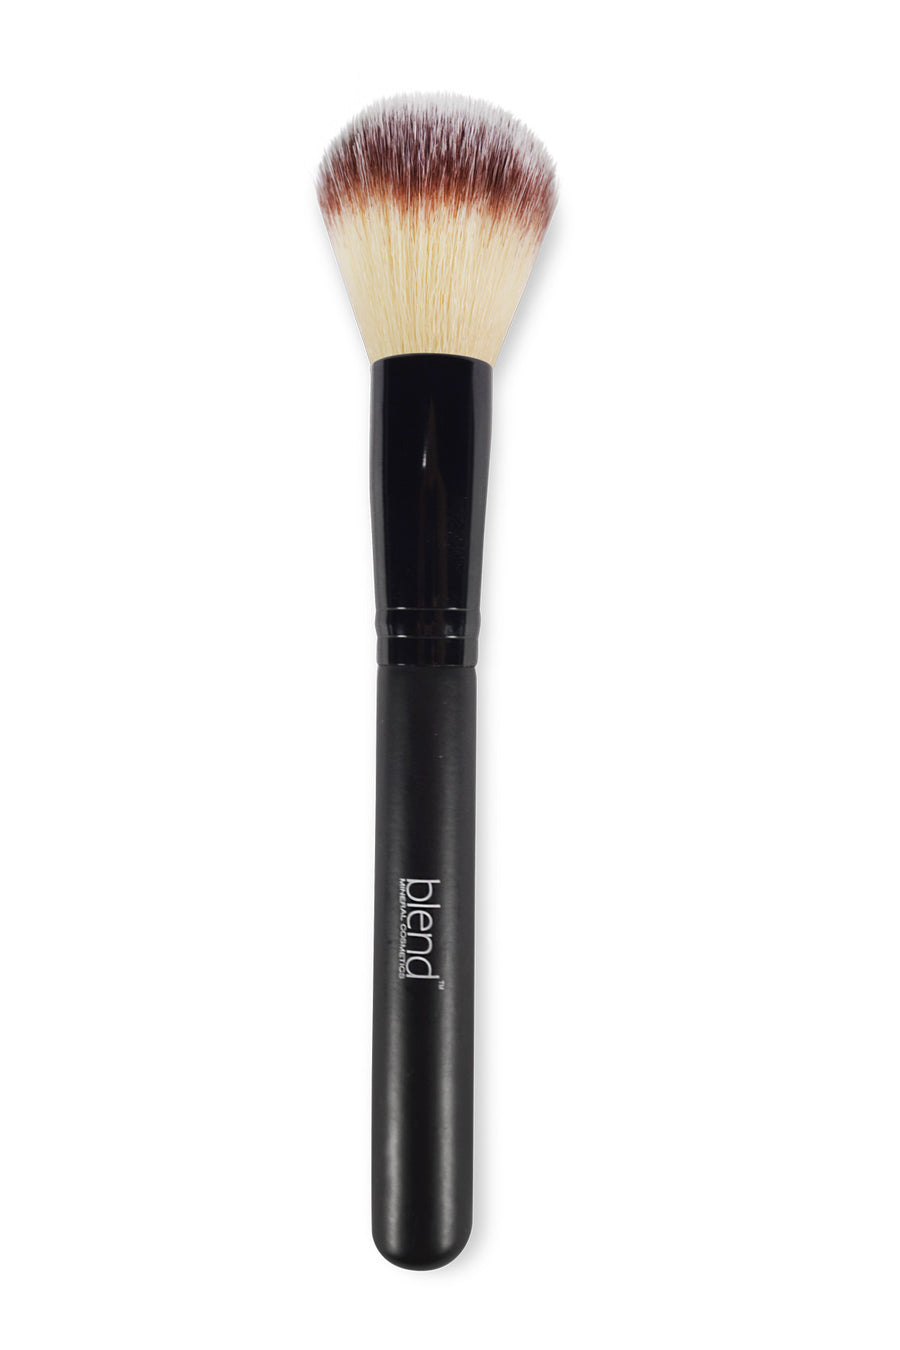 PRO Foundation Powder Brush - Natural Brown - Blend Mineral Cosmetics